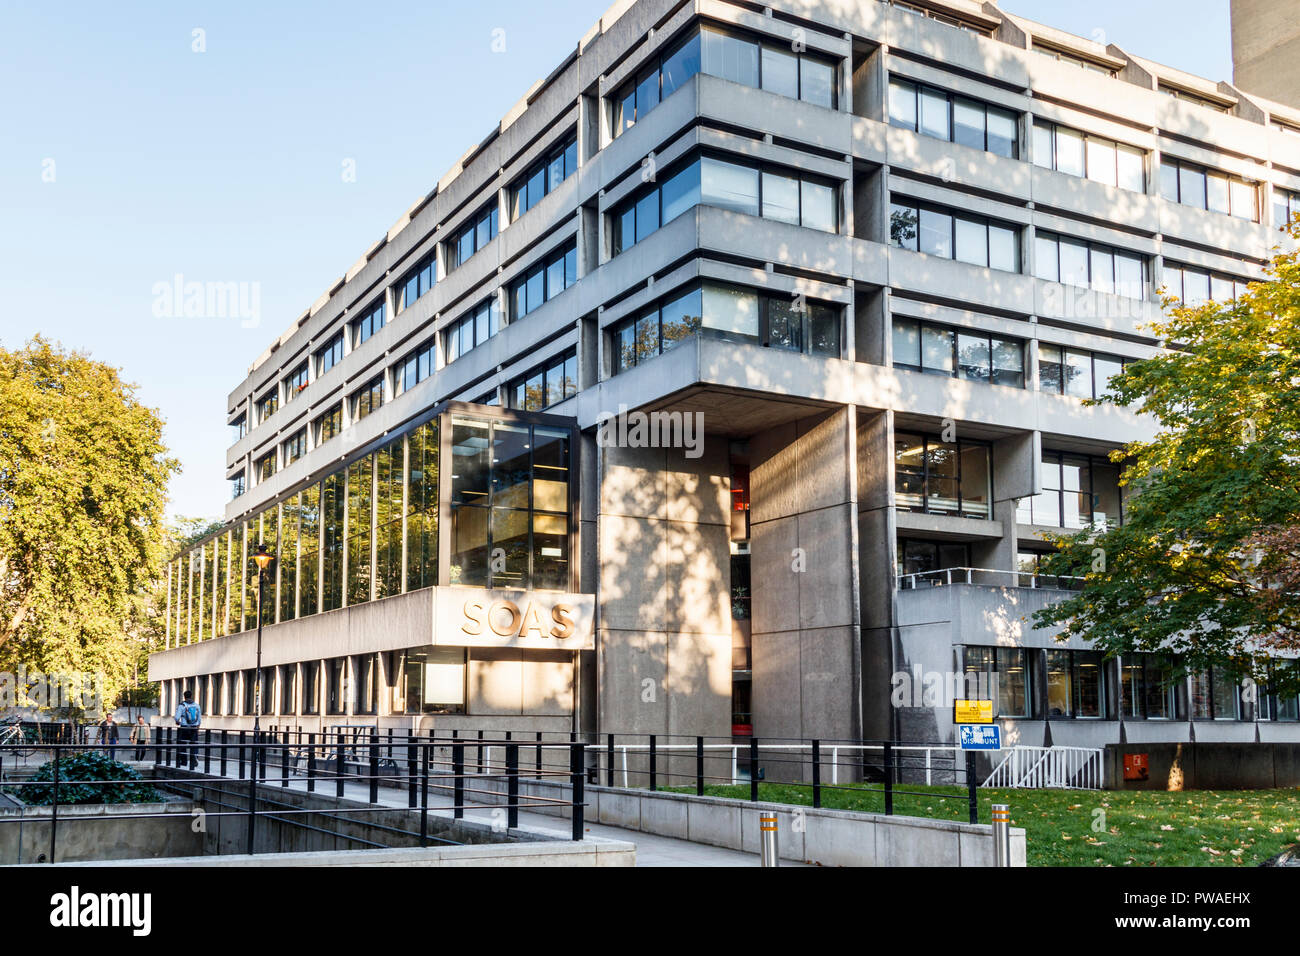 SOAS (the School of African and Oriental Studies), University of London, from Woburn Square, London, UK Stock Photo